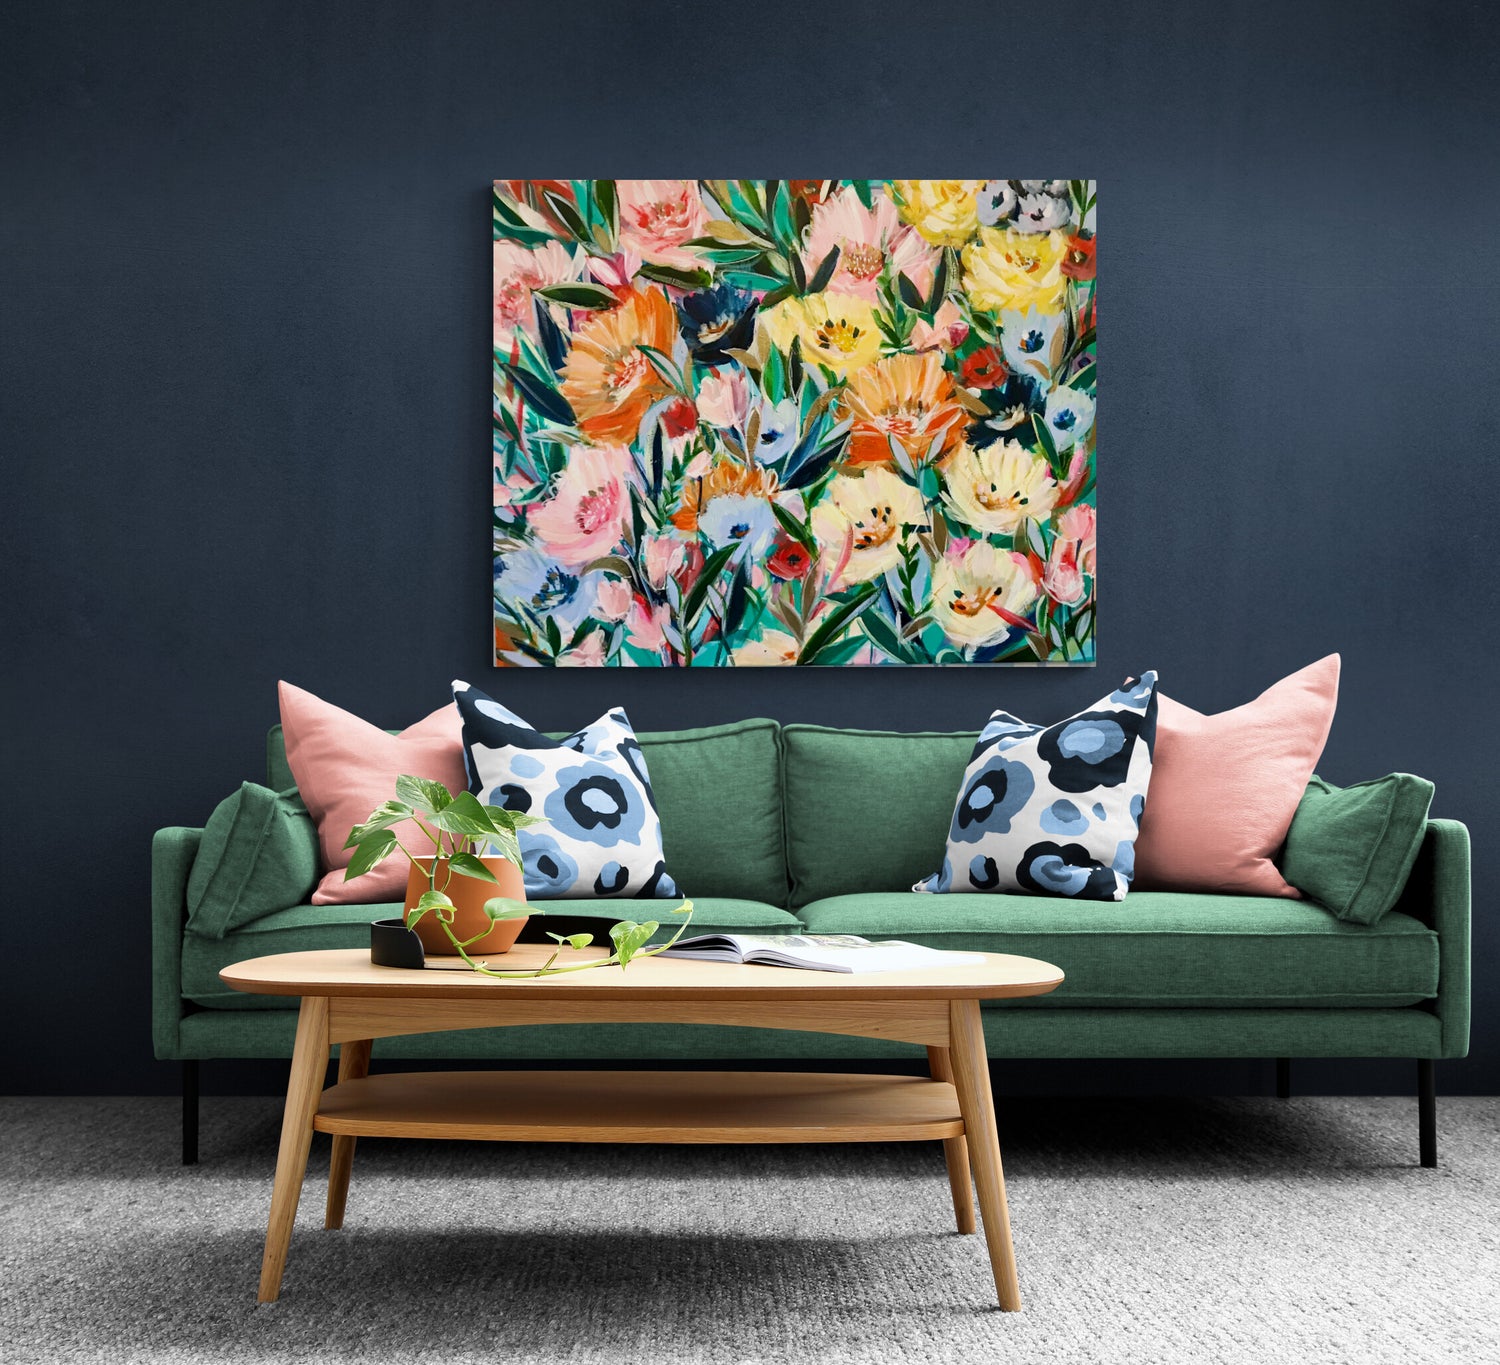 Original large bright colourful floral painting on canvas. 